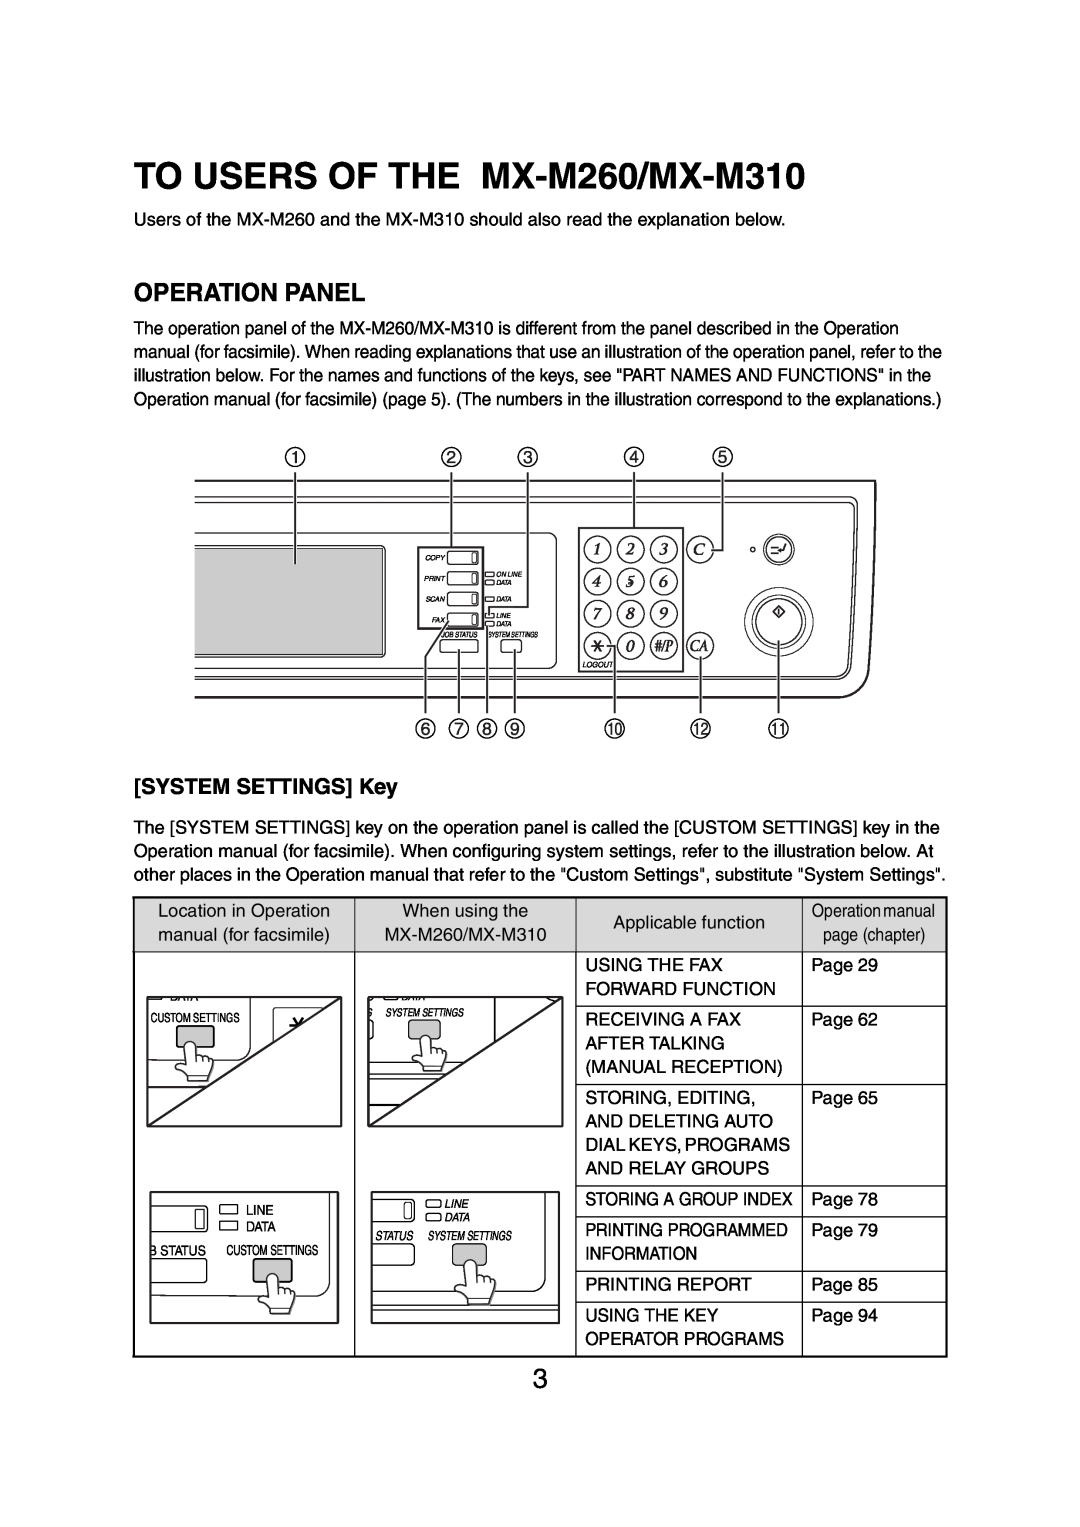 Sharp AR-M257 operation manual Operation Panel, TO USERS OF THE MX-M260/MX-M310 